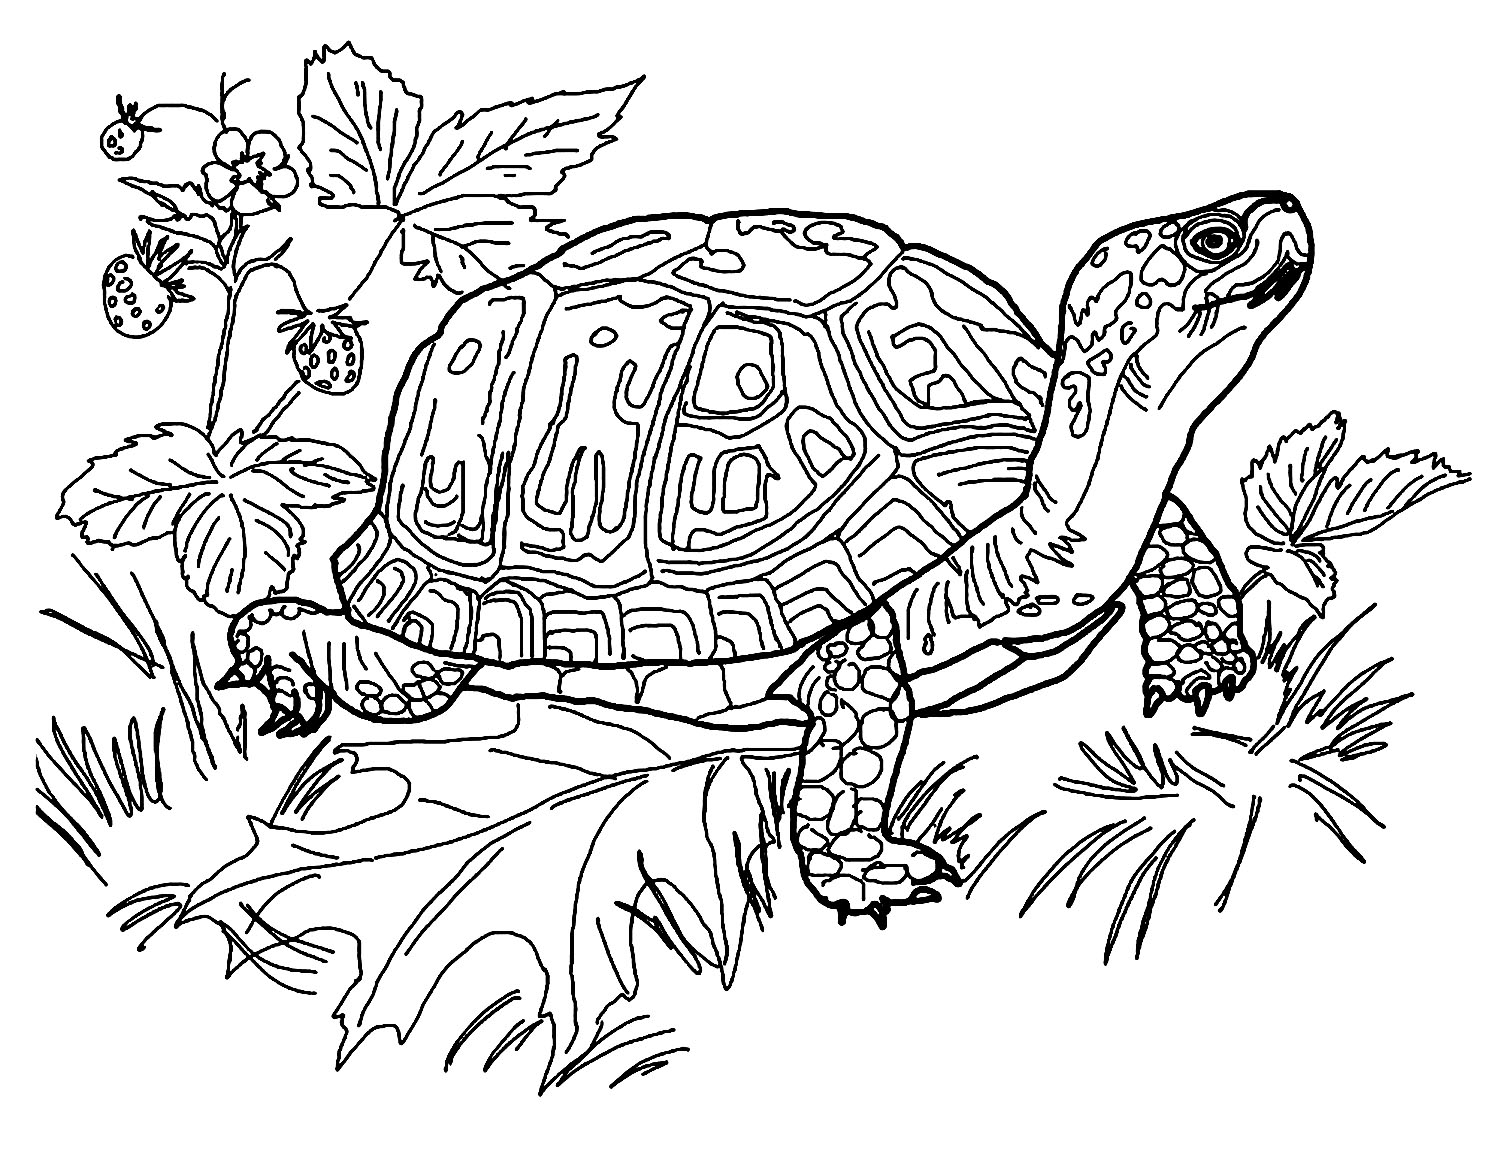 Get your pencils and markers ready to color this turtle coloring page